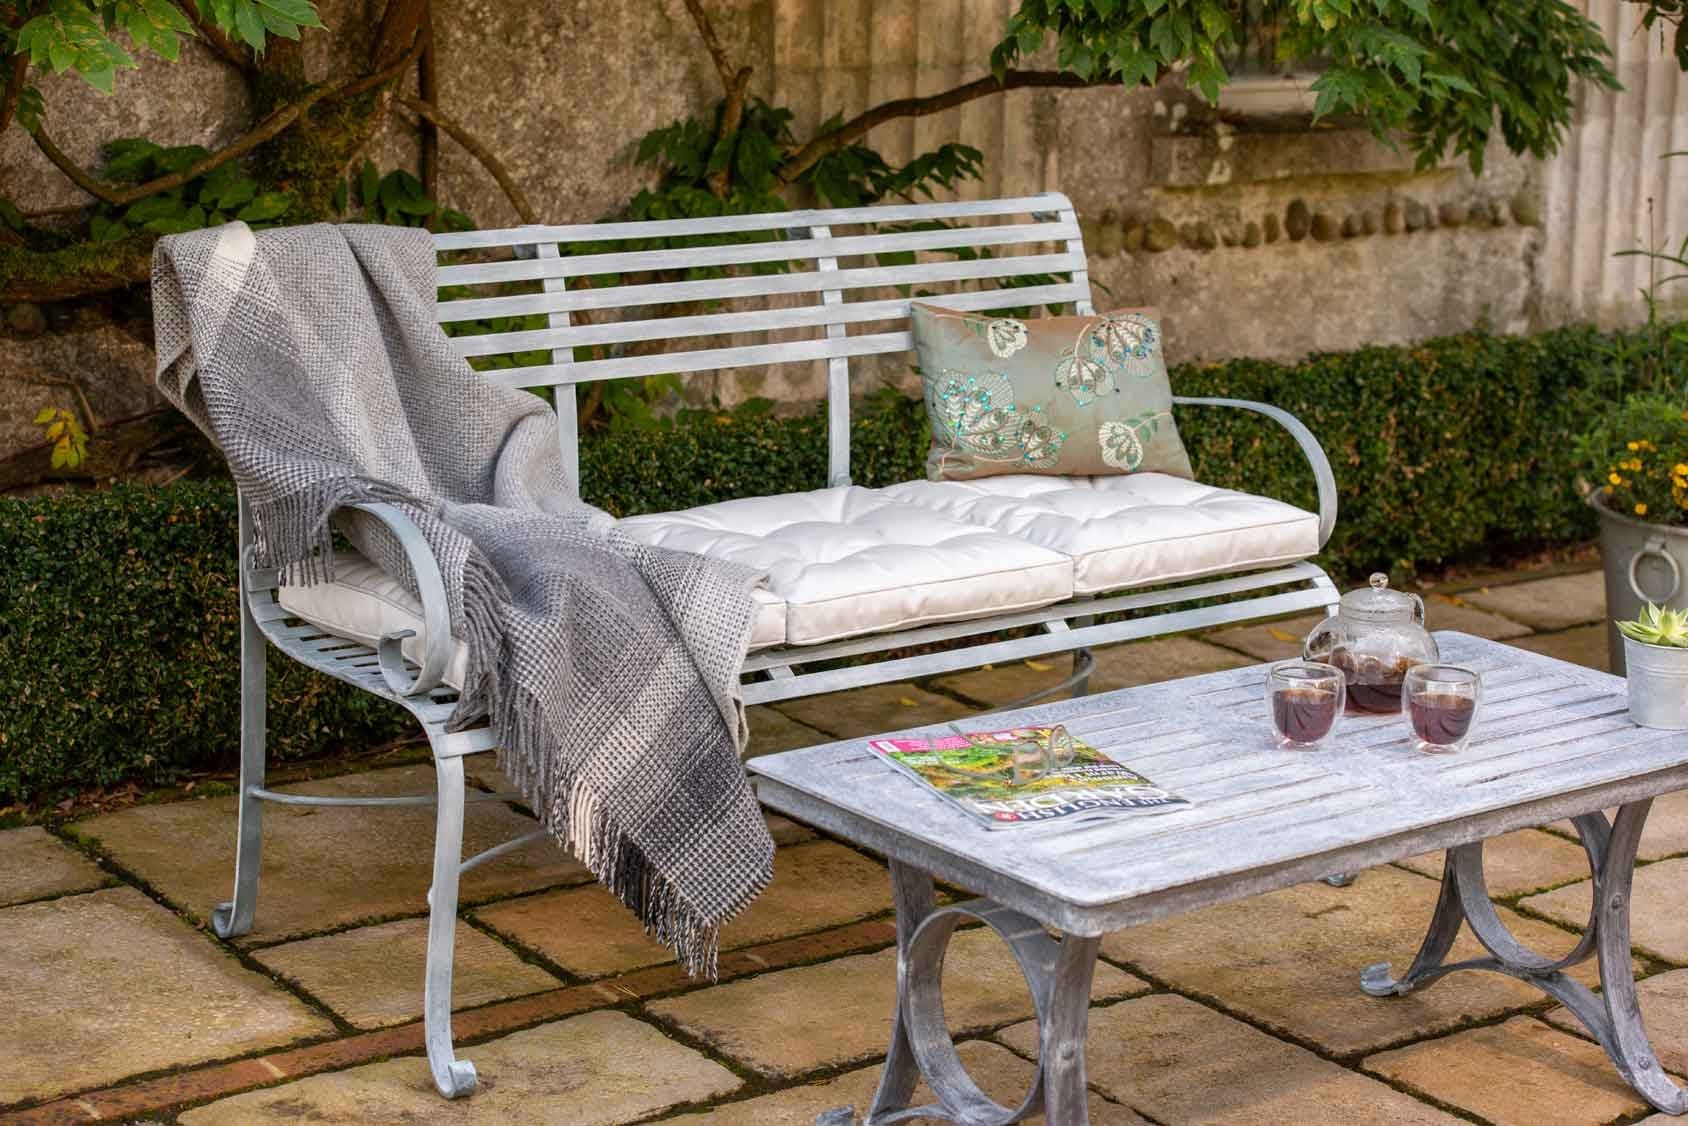 Luxury Bench with Back Rest - 3 Seater - The Southwold Collection by Harrod Horticultural